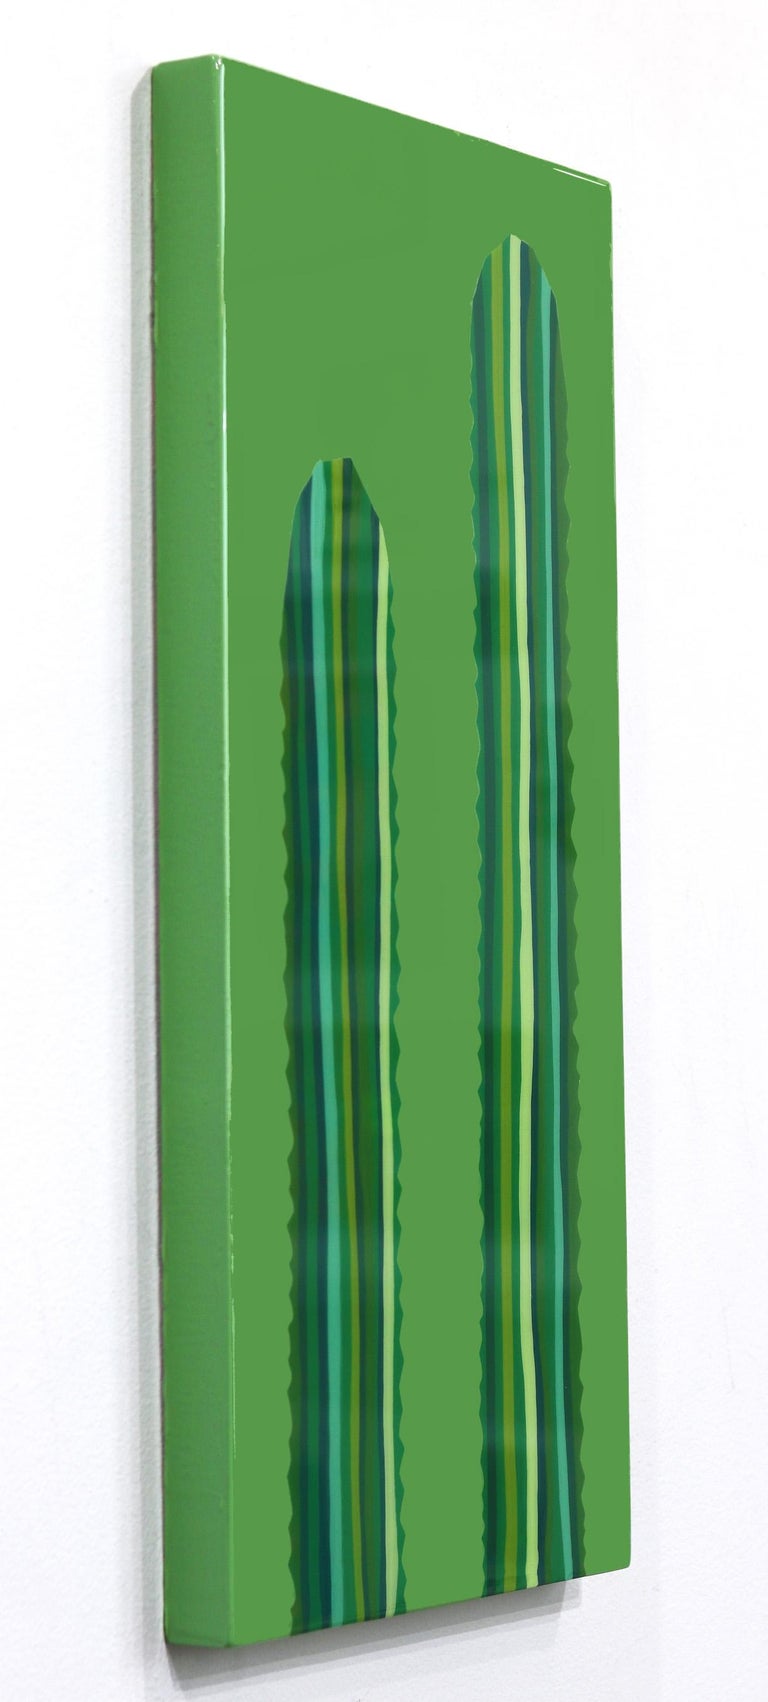 Maquina Verde - Green Abstract Painting by Will Beger